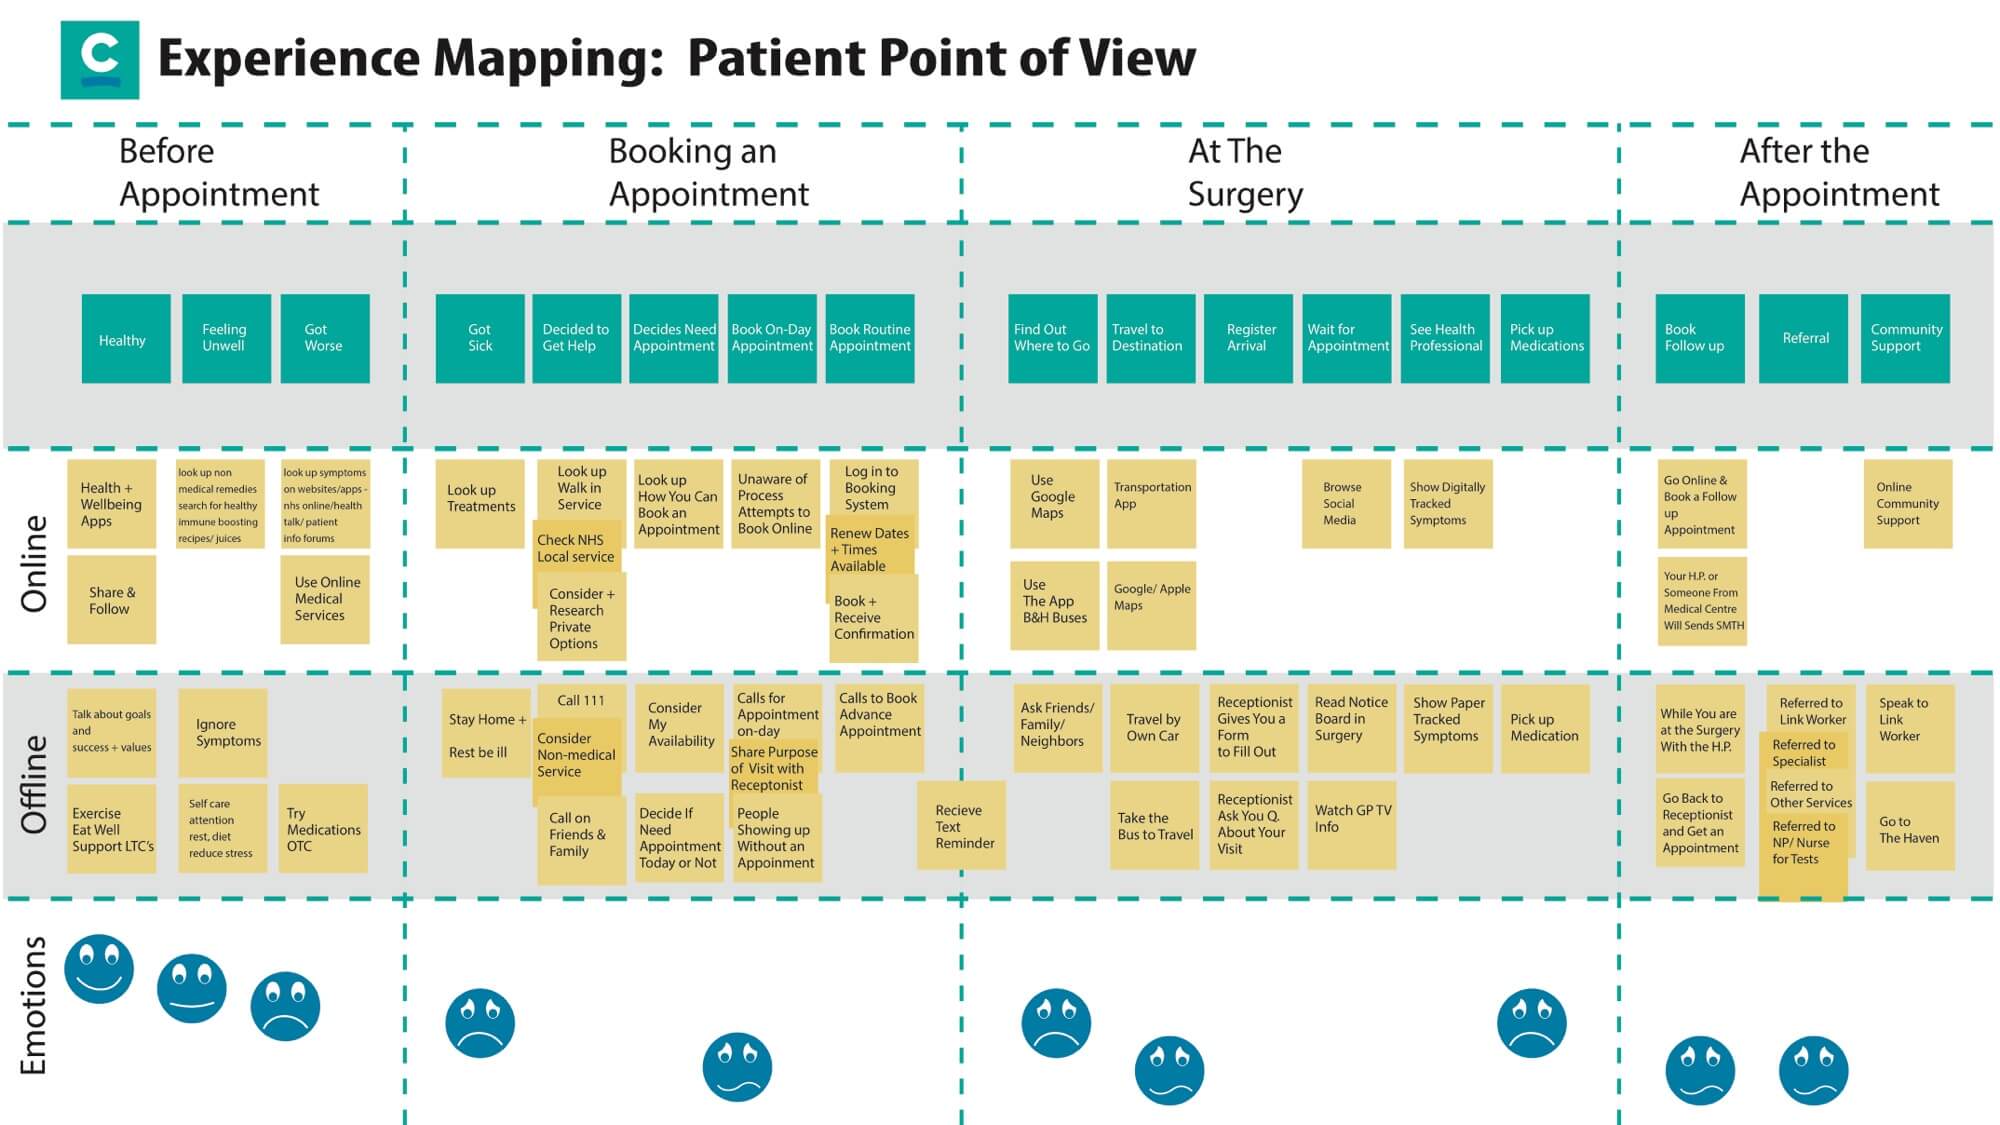 The patient journey experience map